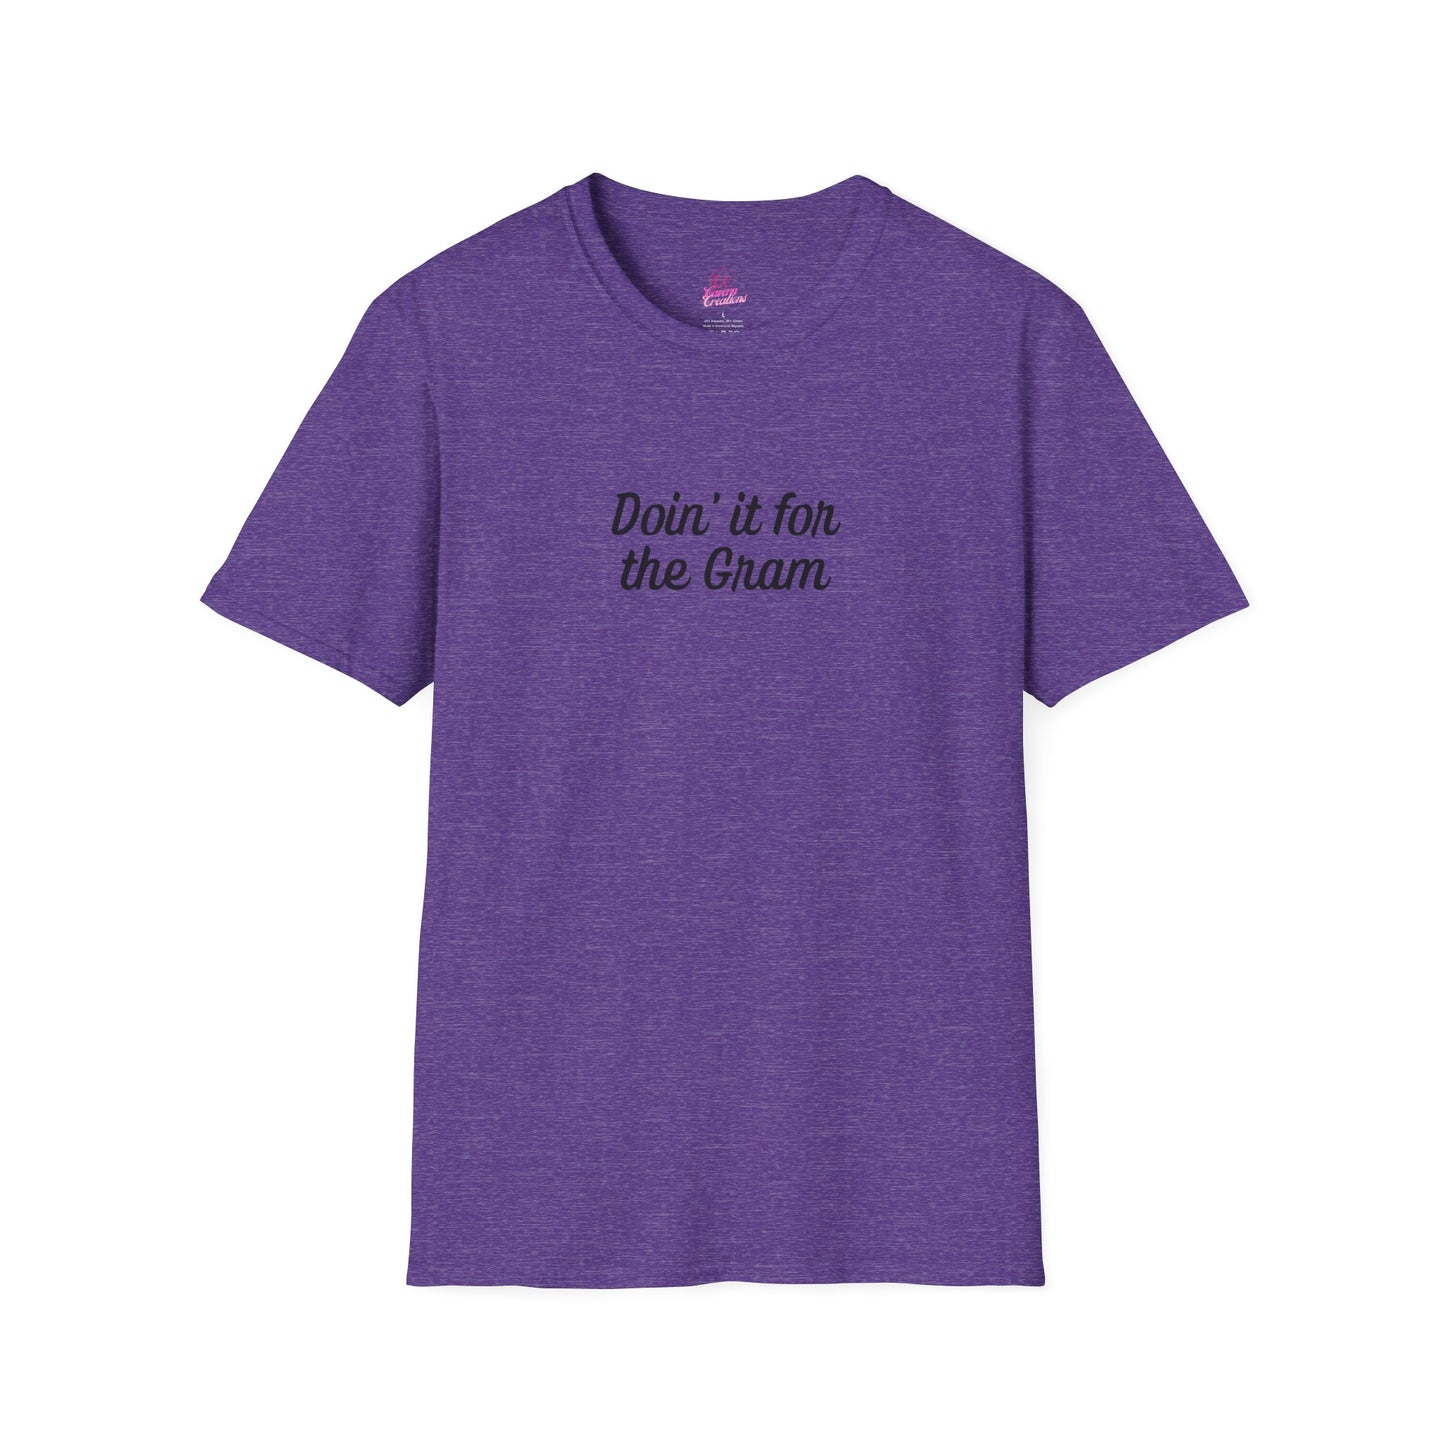 Doin' it for the Gram Influencer Women's Plus Short Sleeve Softstyle T-Shirt Sizes xl-5xl